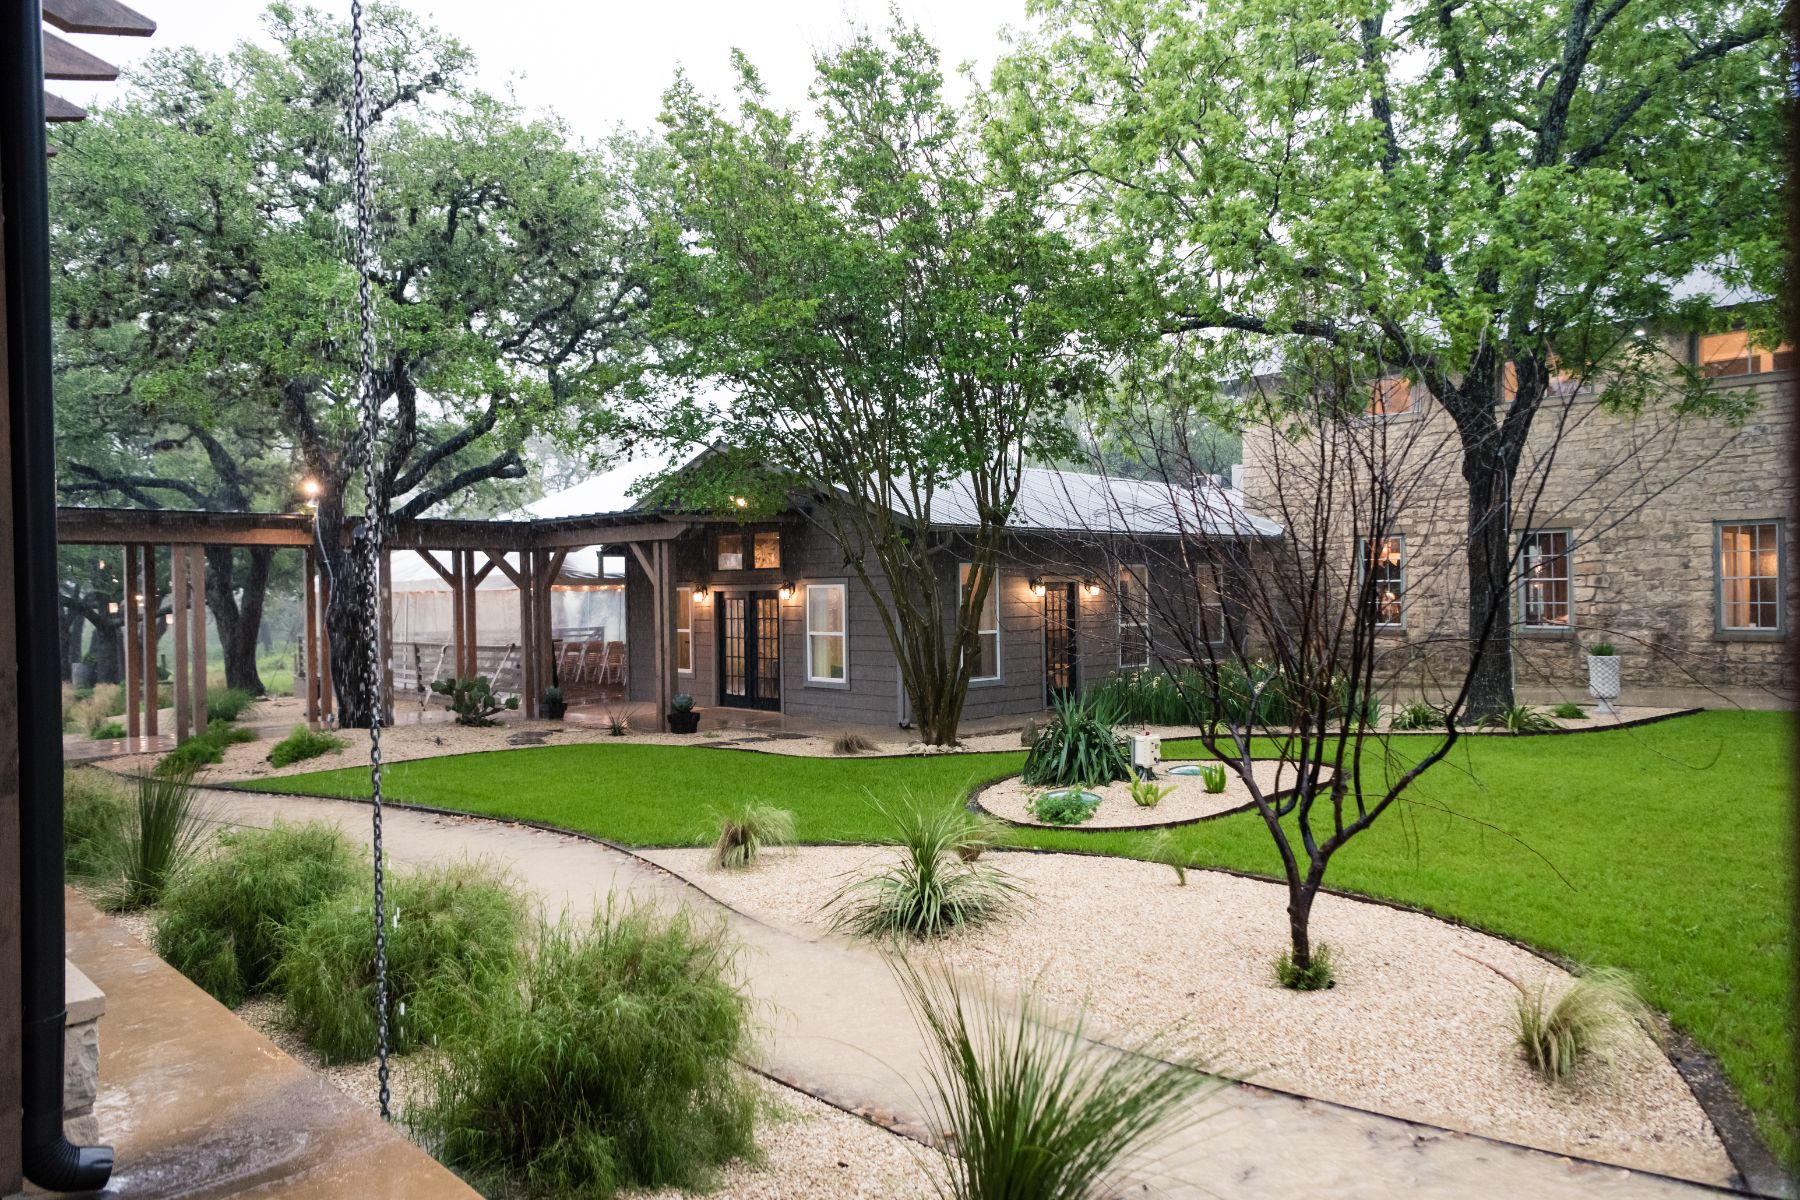 Outdoor lawn and courtyard space at Stonehouse Villa.